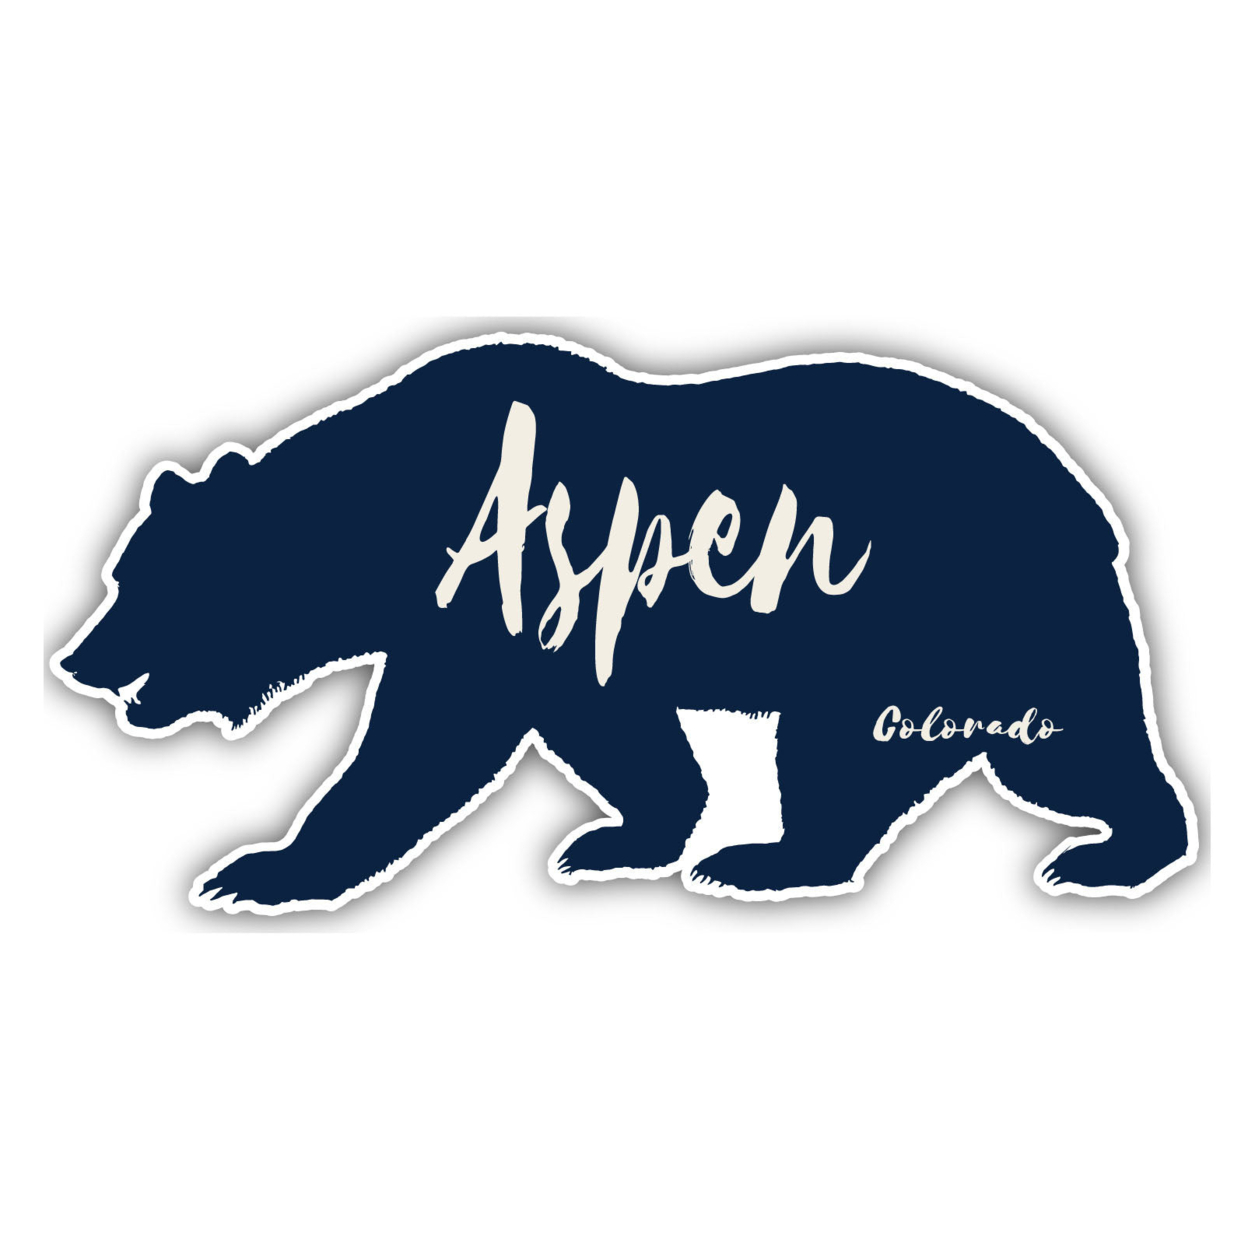 Aspen Colorado Souvenir Decorative Stickers (Choose Theme And Size) - 4-Pack, 4-Inch, Great Outdoors